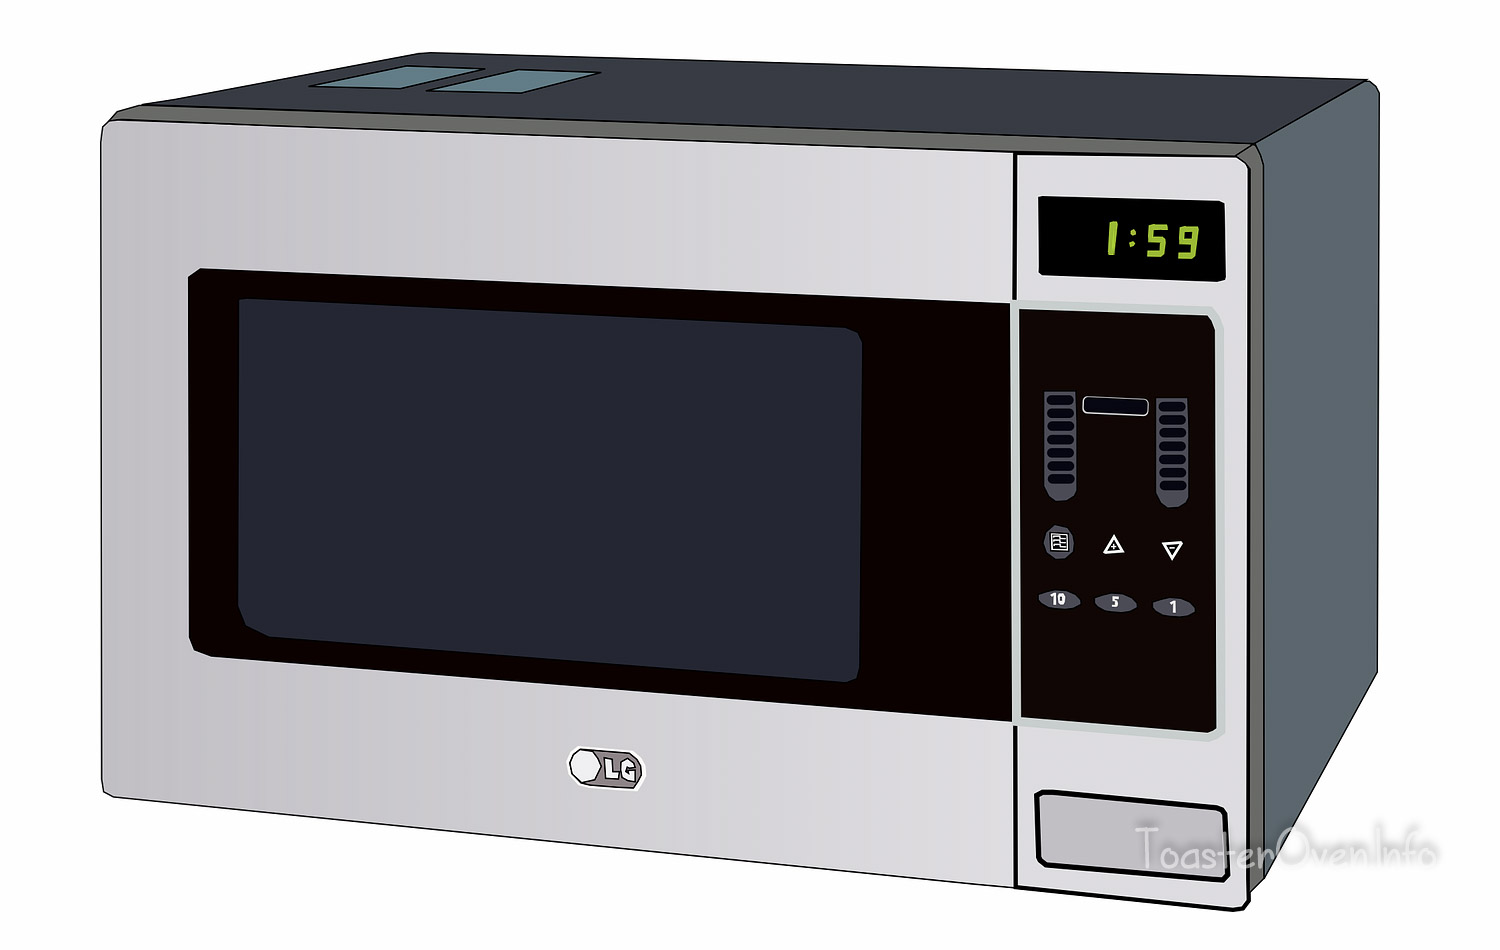 Microwave oven vs toaster oven